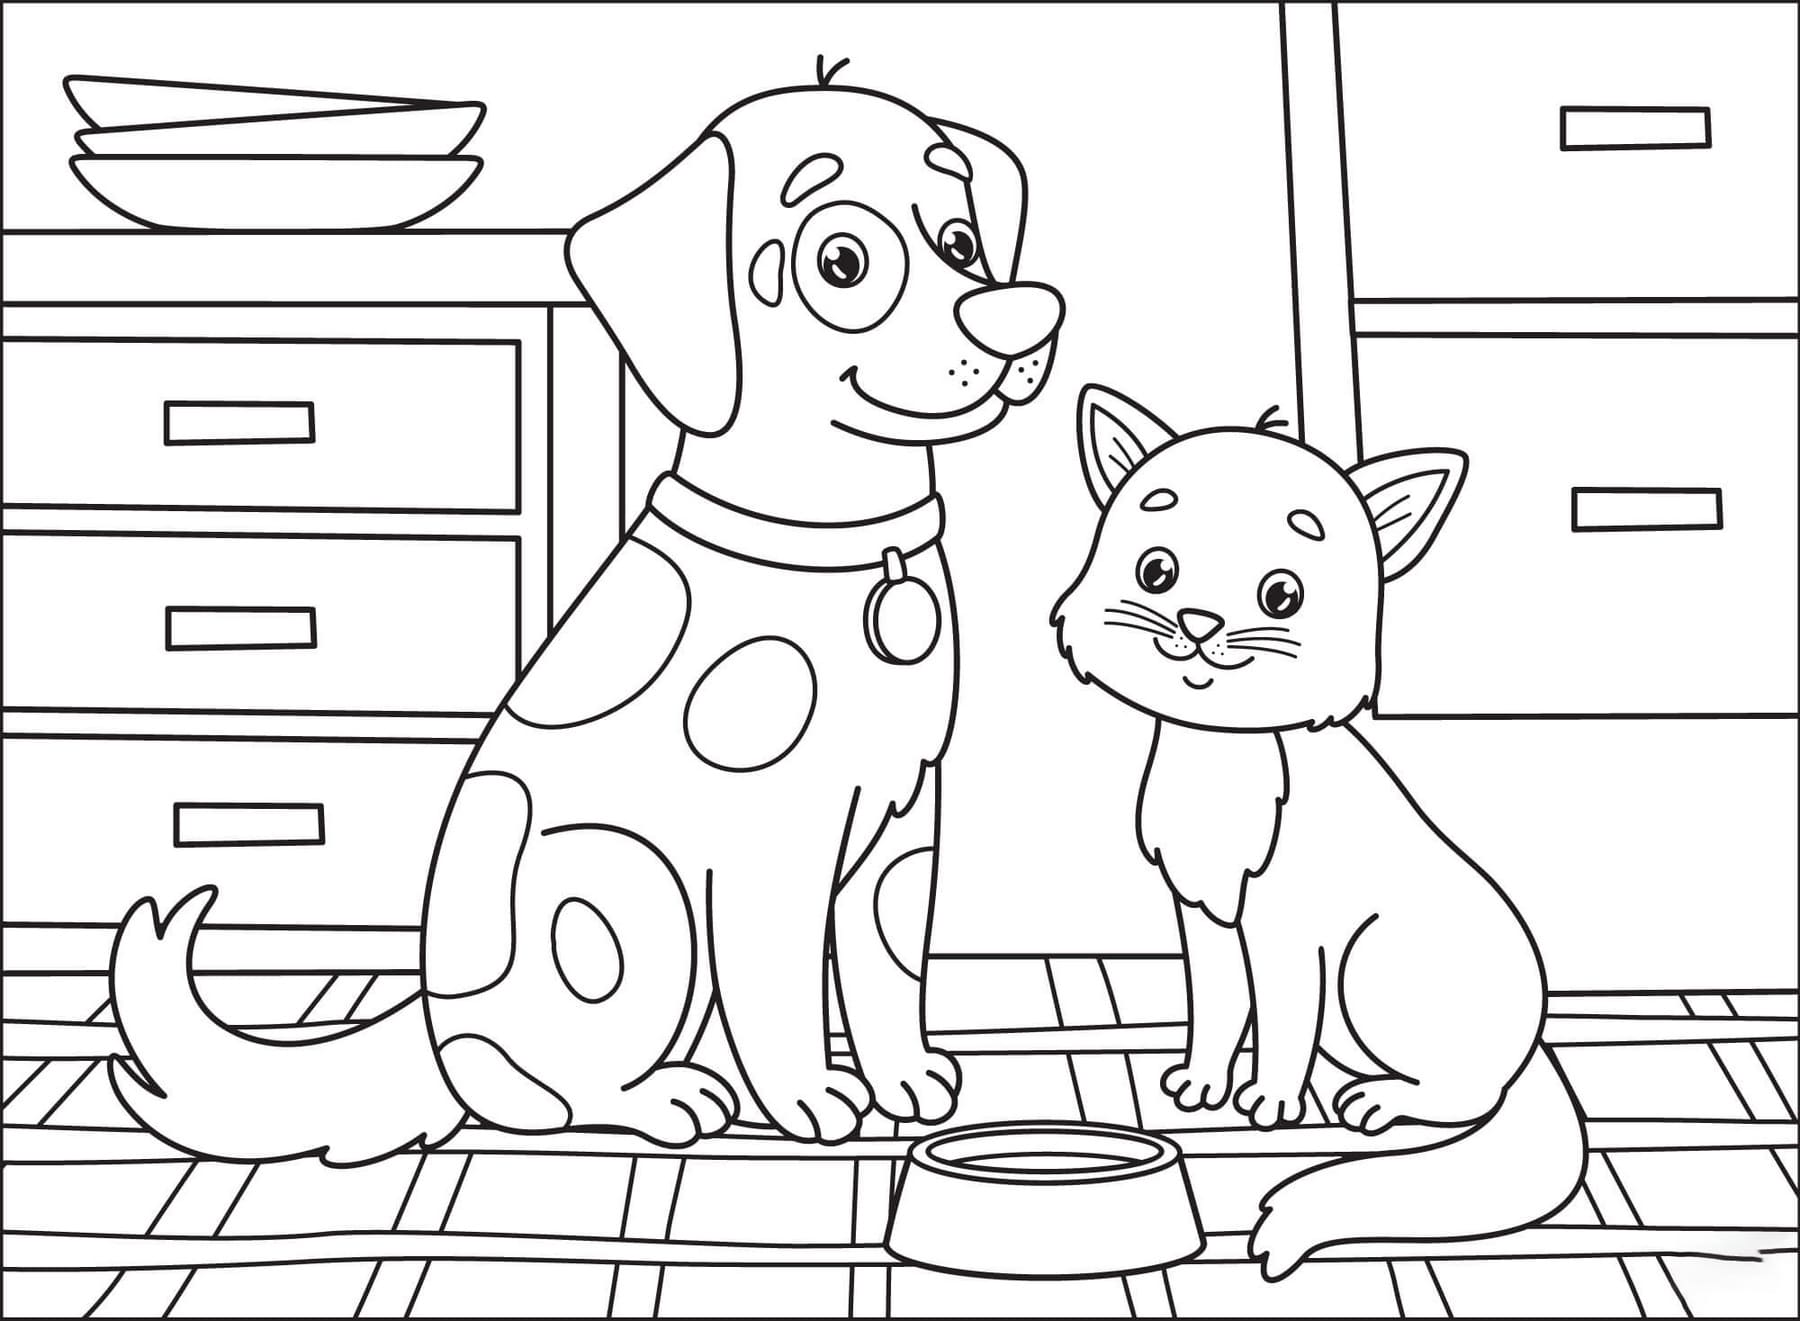 Cat and Dog Coloring Pages   Printable Coloring Pages